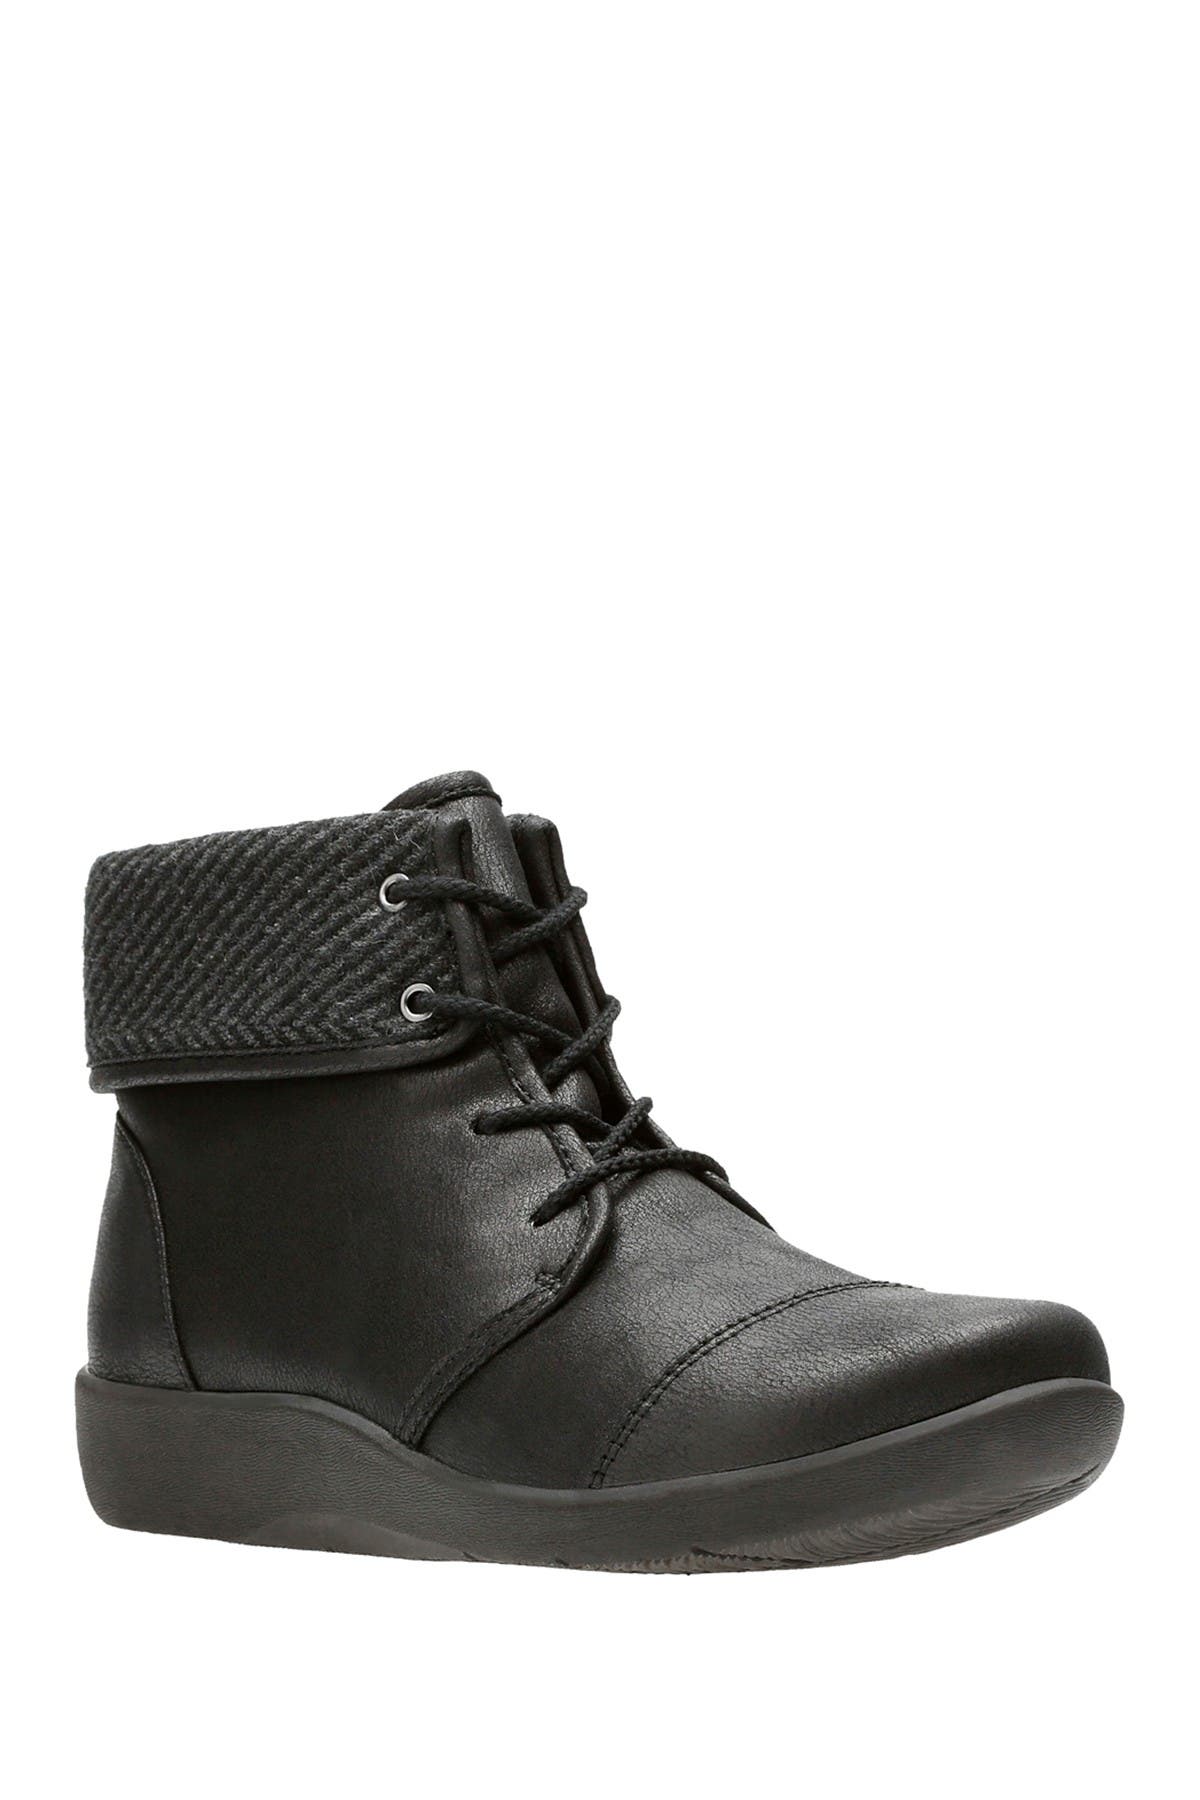 clarks cloudsteppers boots sillian frey